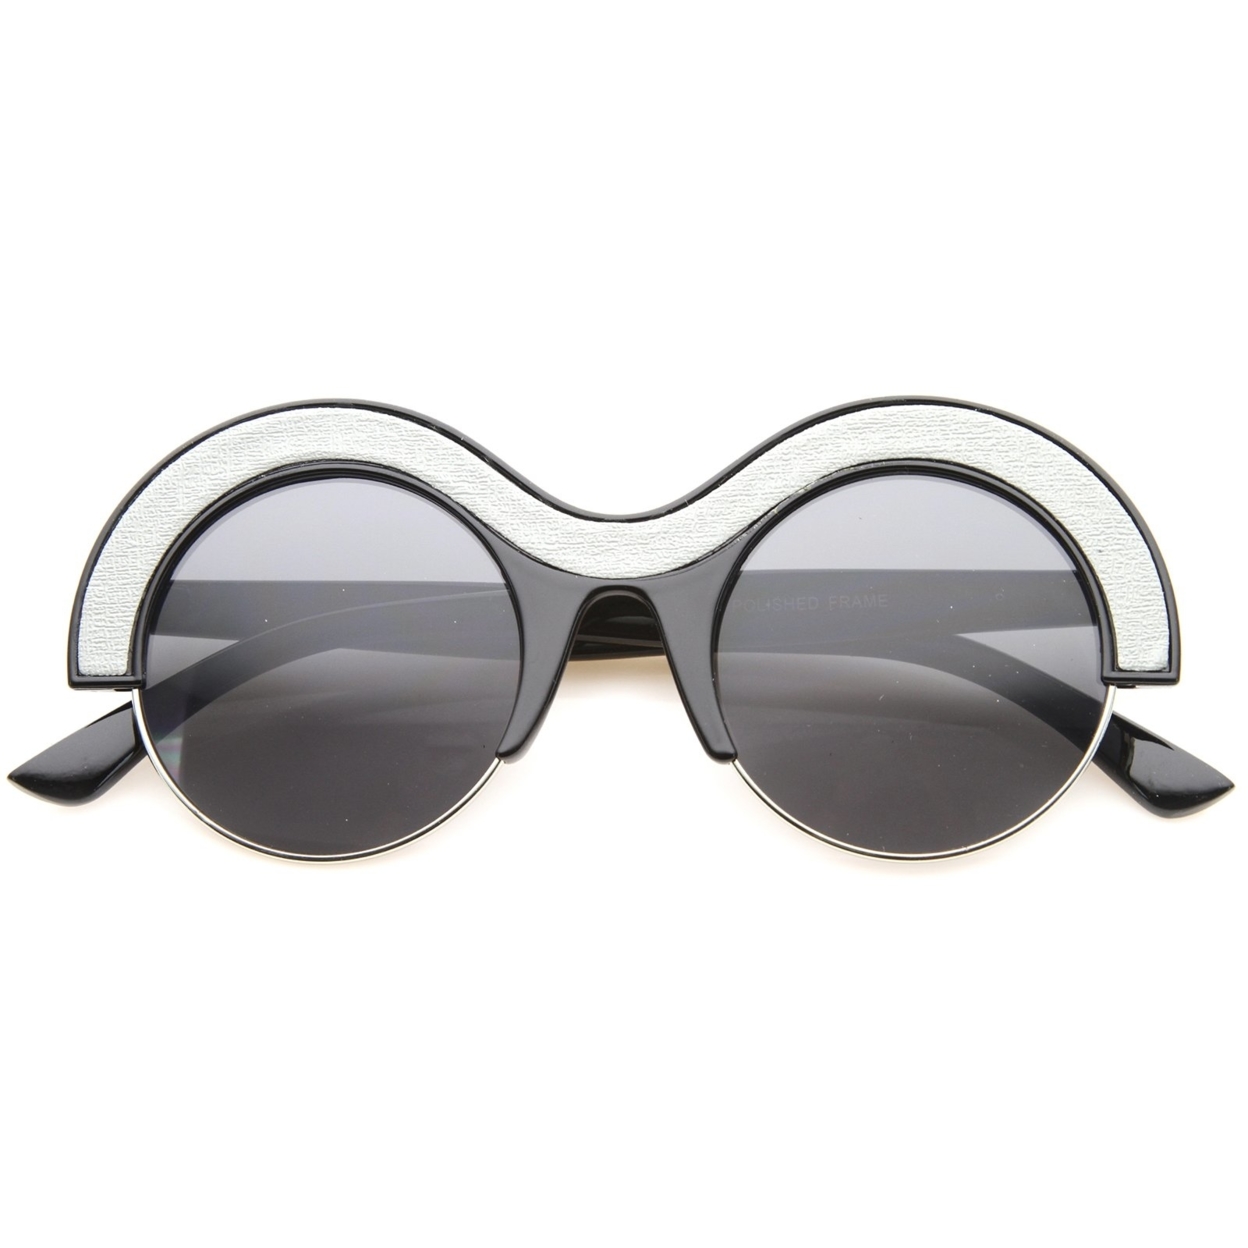 Womens Round Sunglasses With UV400 Protected Mirrored Lens - Black-Grey / Smoke